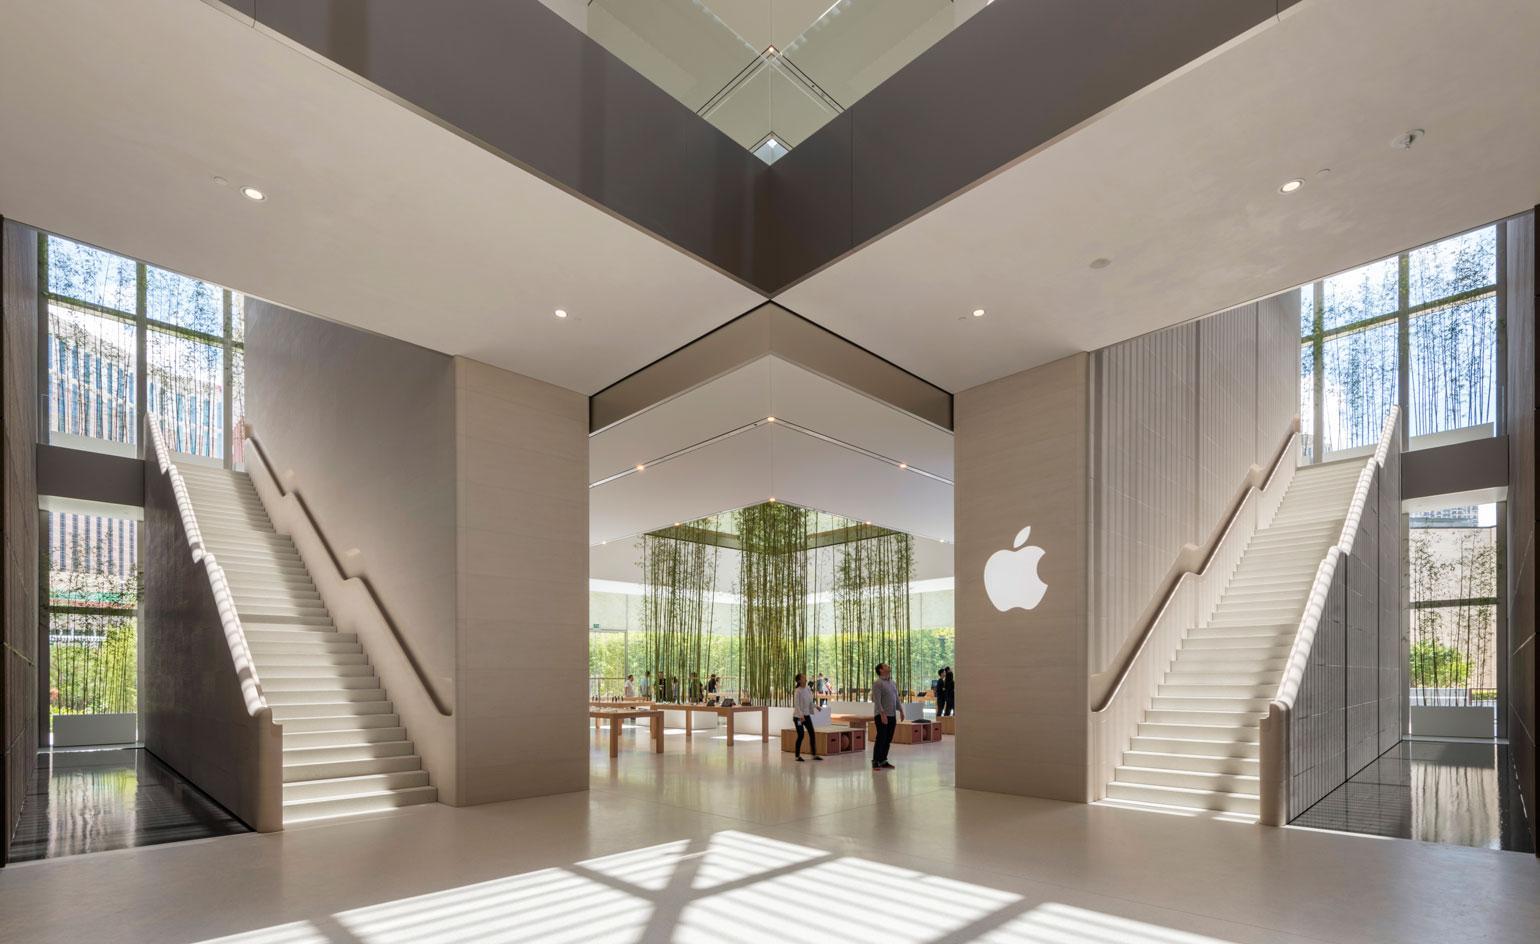 apple store wallpaper,property,ceiling,lobby,building,architecture